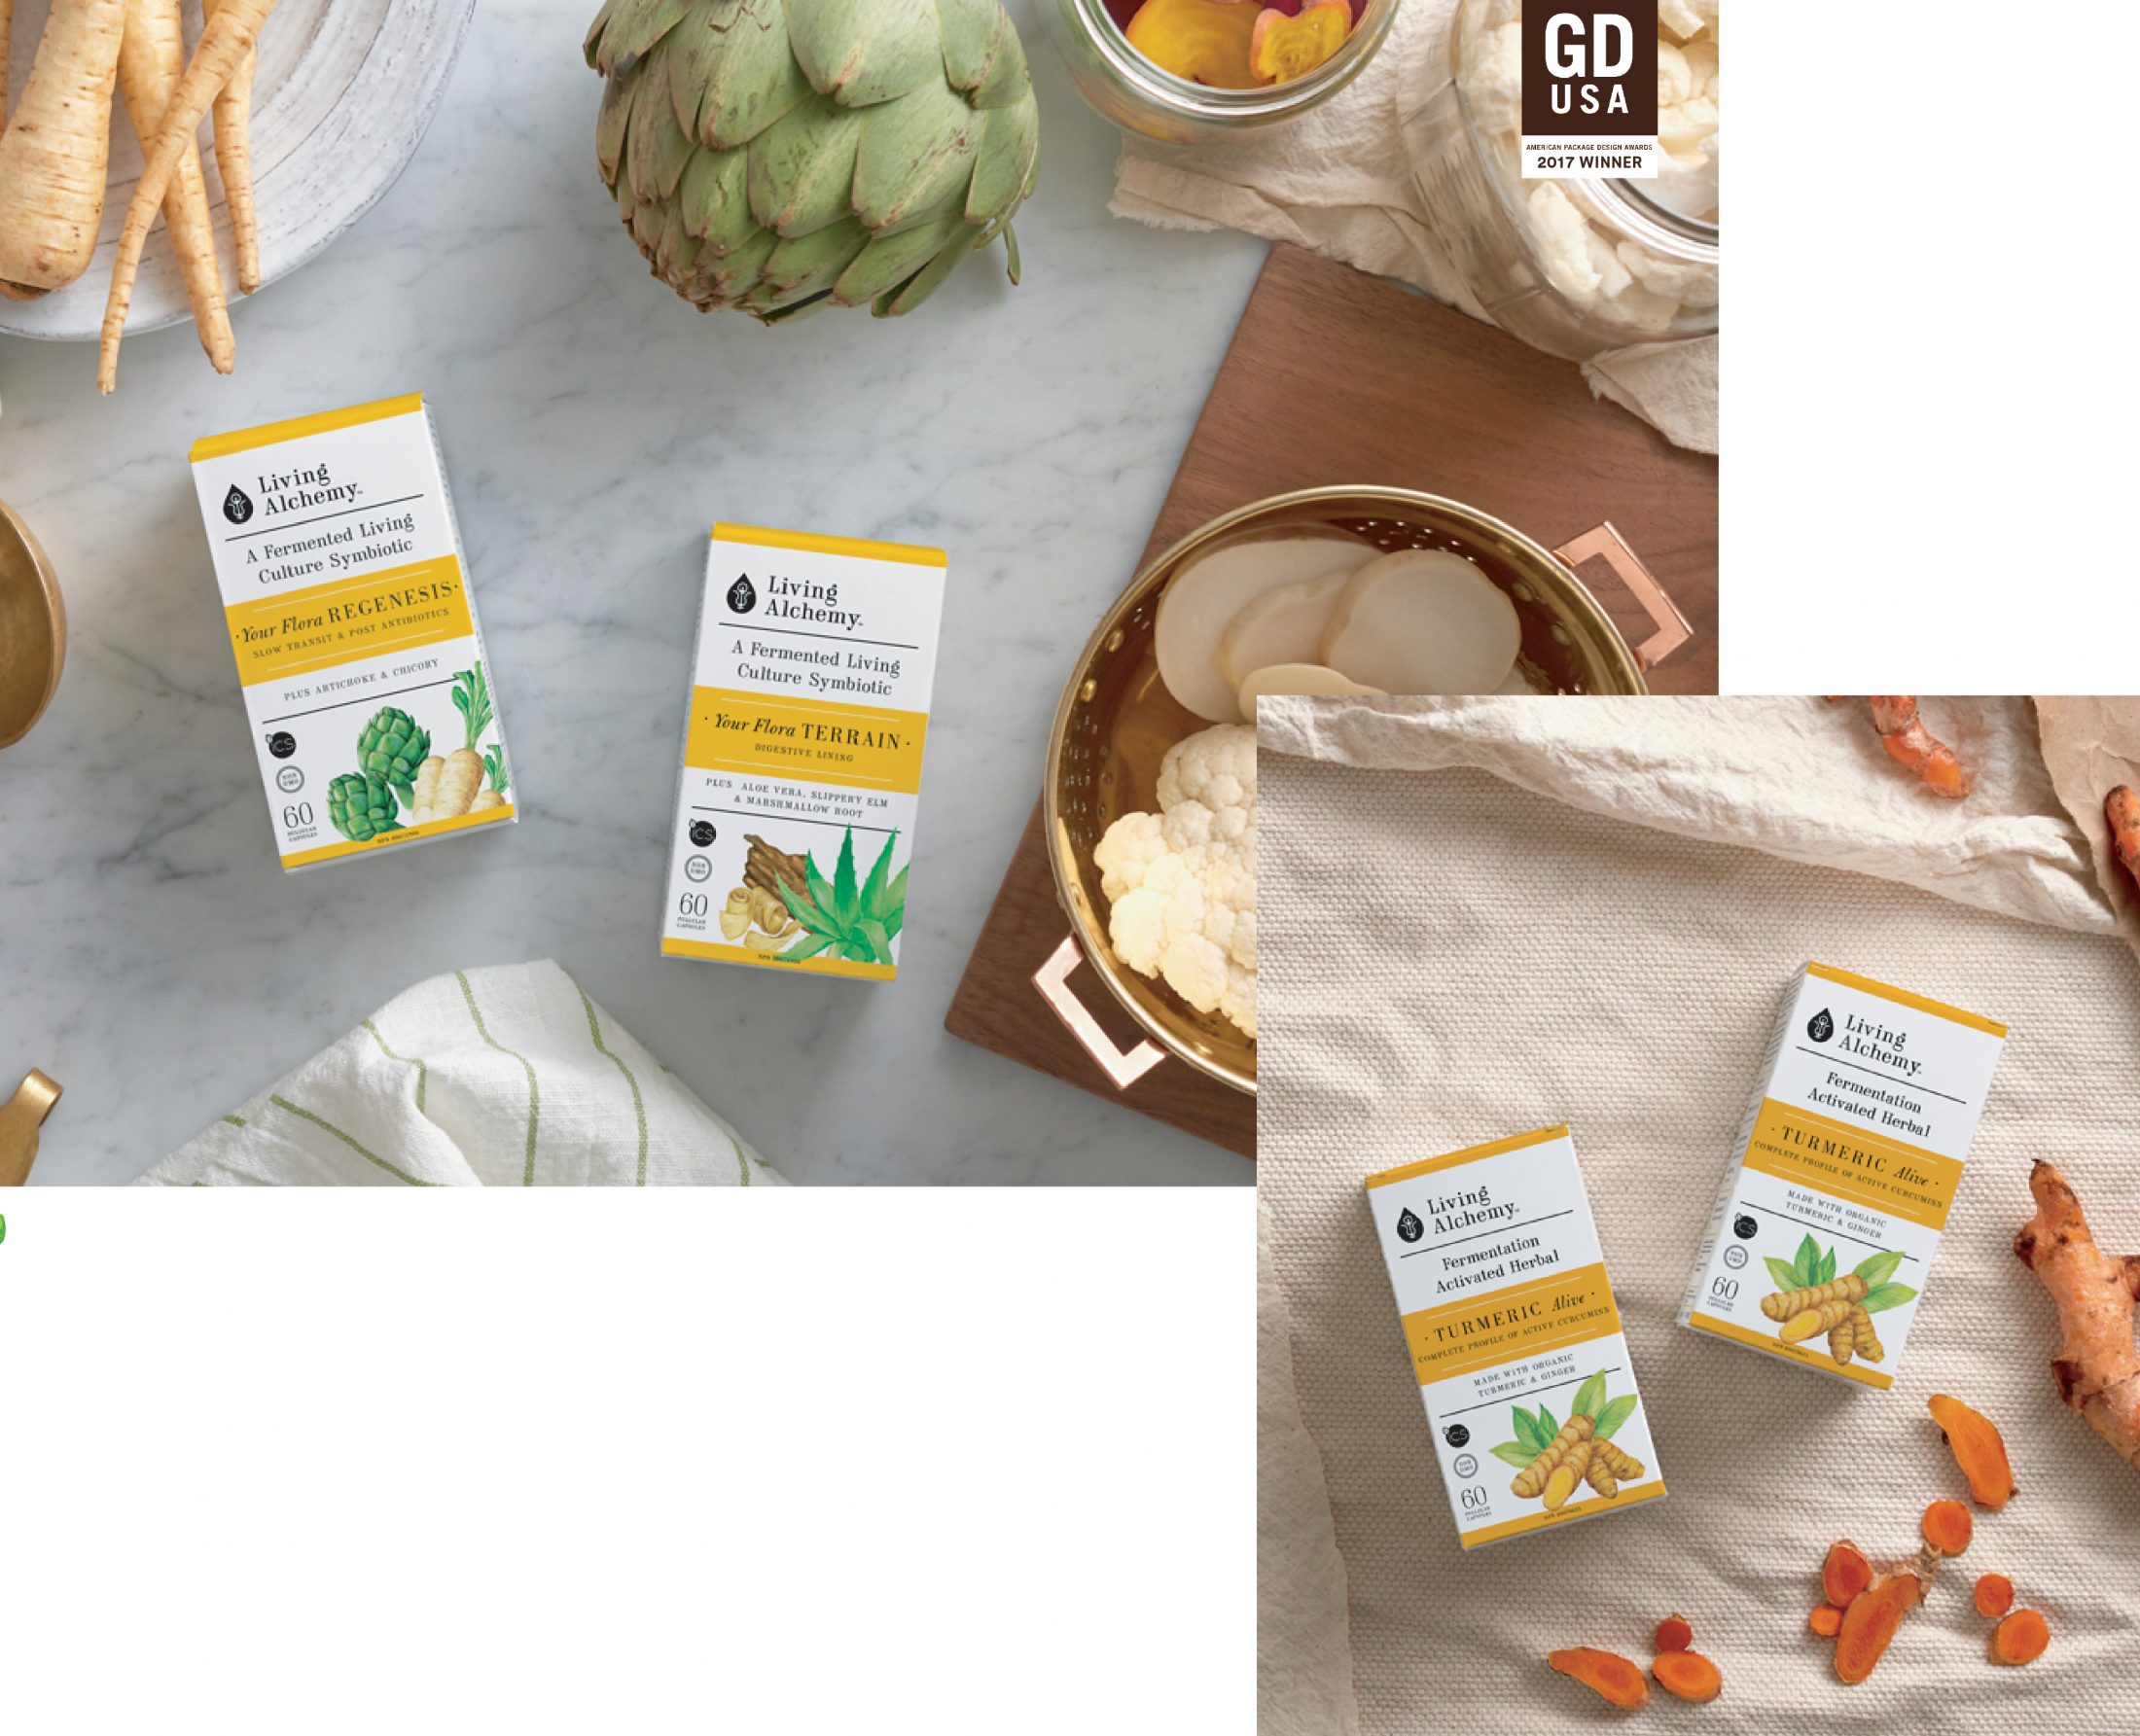 Award winning branding and packaging design for Living Alchemy vitamins and supplements. 